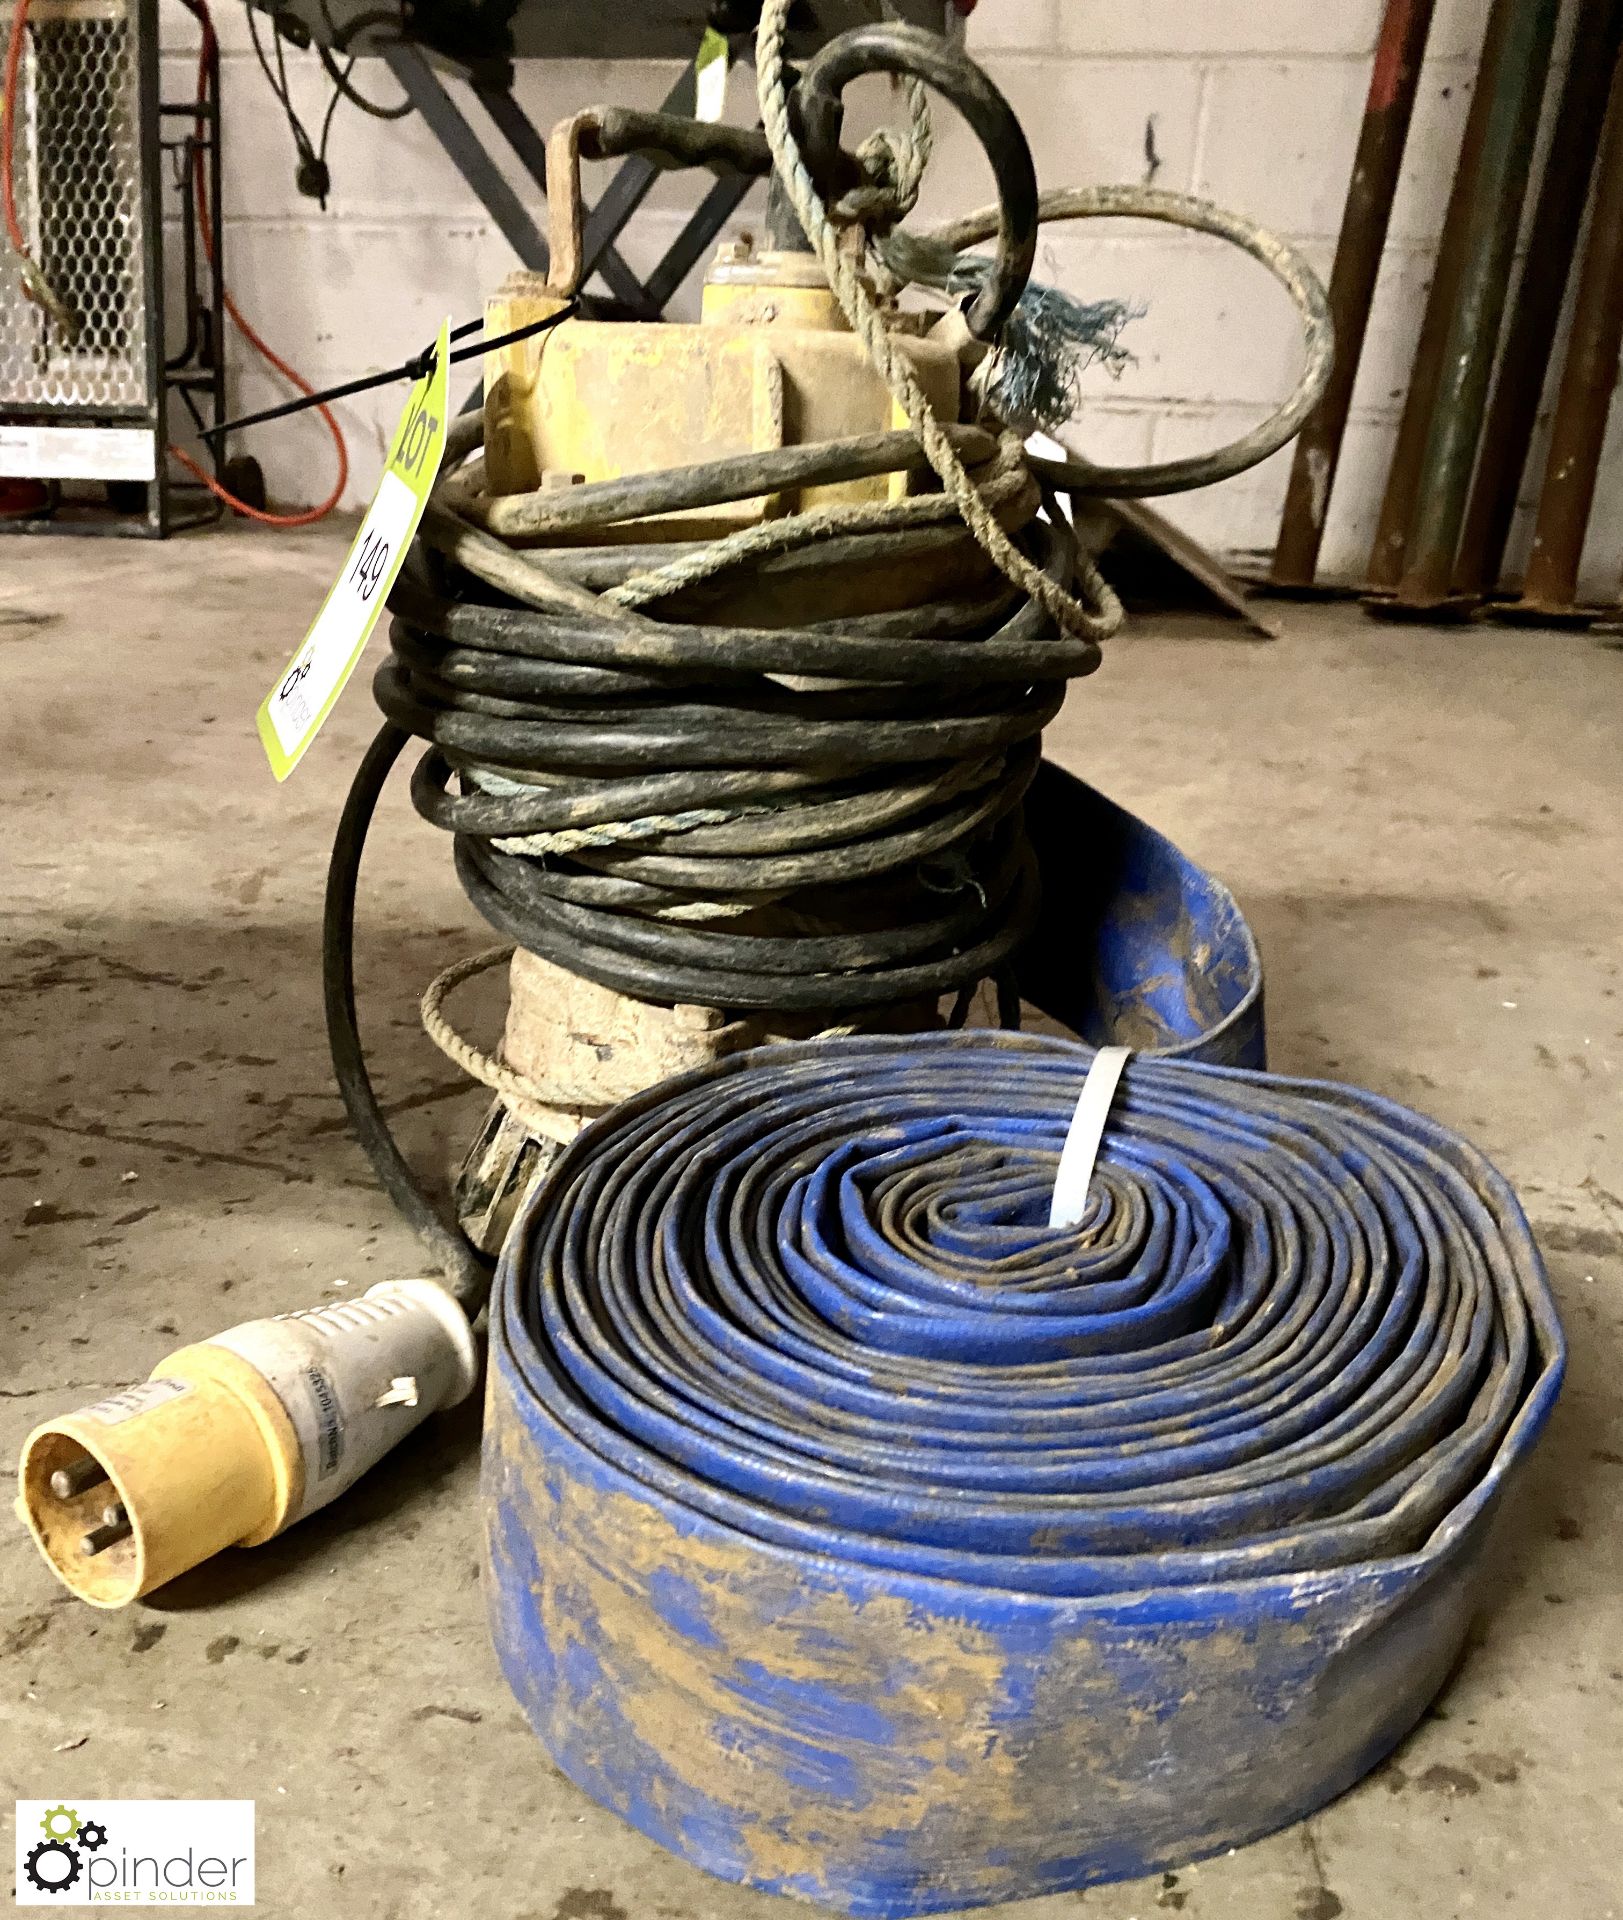 PST2 400 Submersible Pump, 110volts, with hose - Image 4 of 5